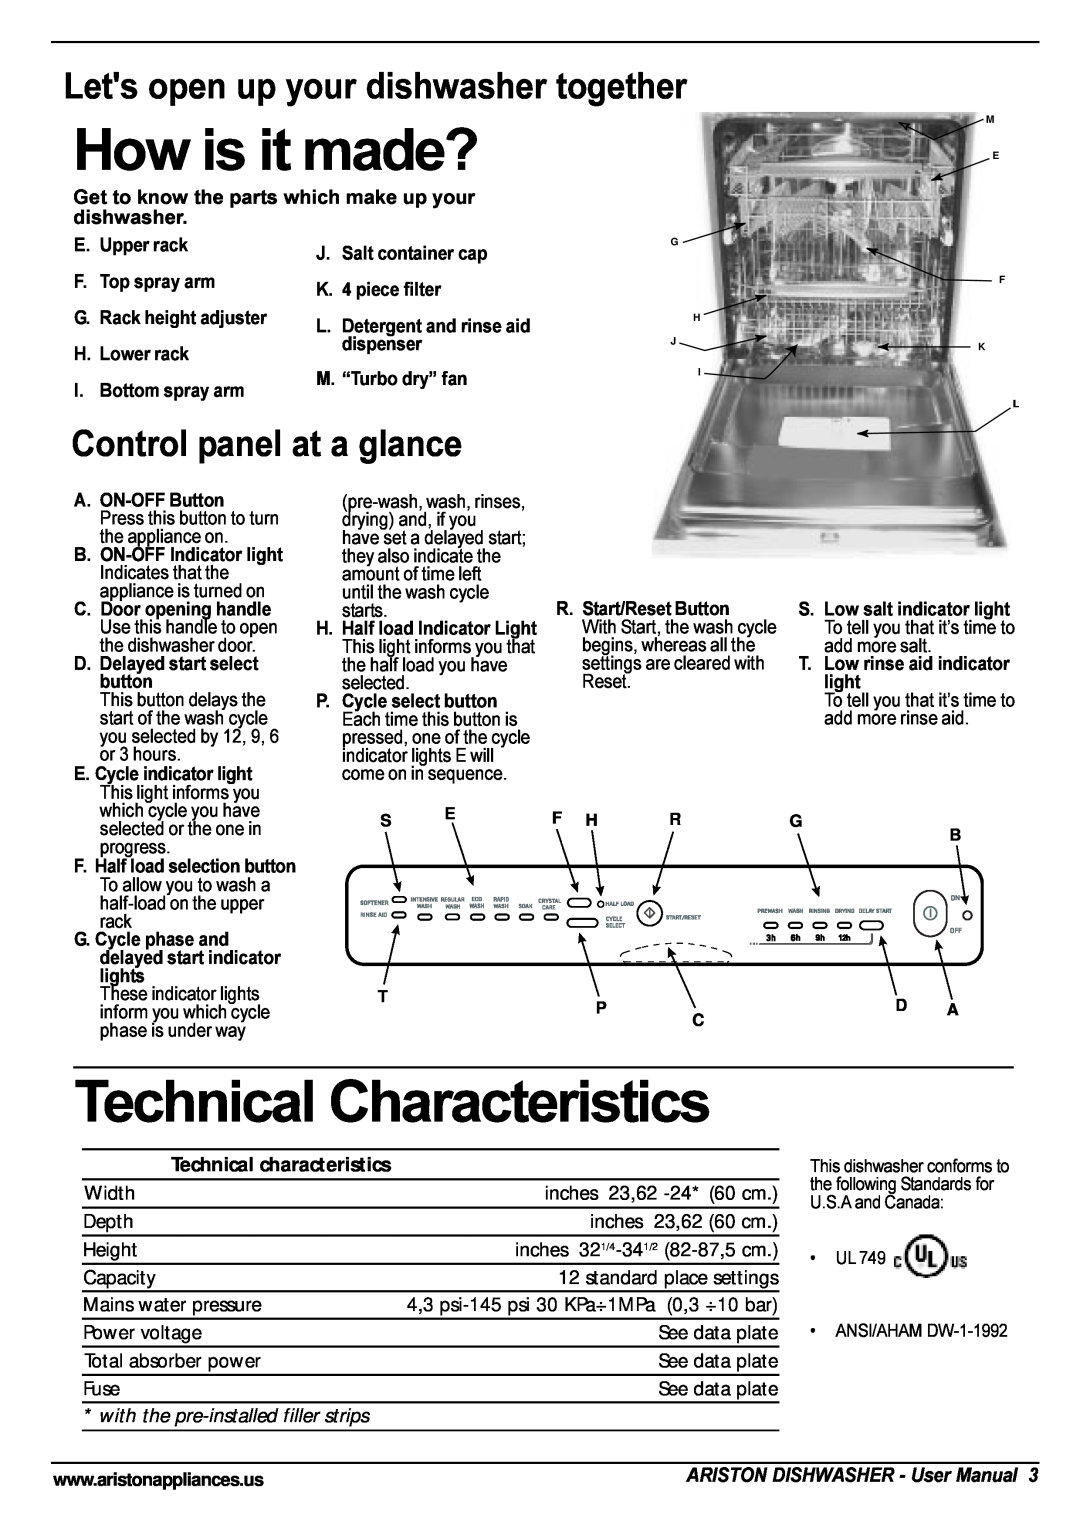 Ariston LL 65 B-S-W manual How is it made?, Technical Characteristics, Lets open up your dishwasher together 